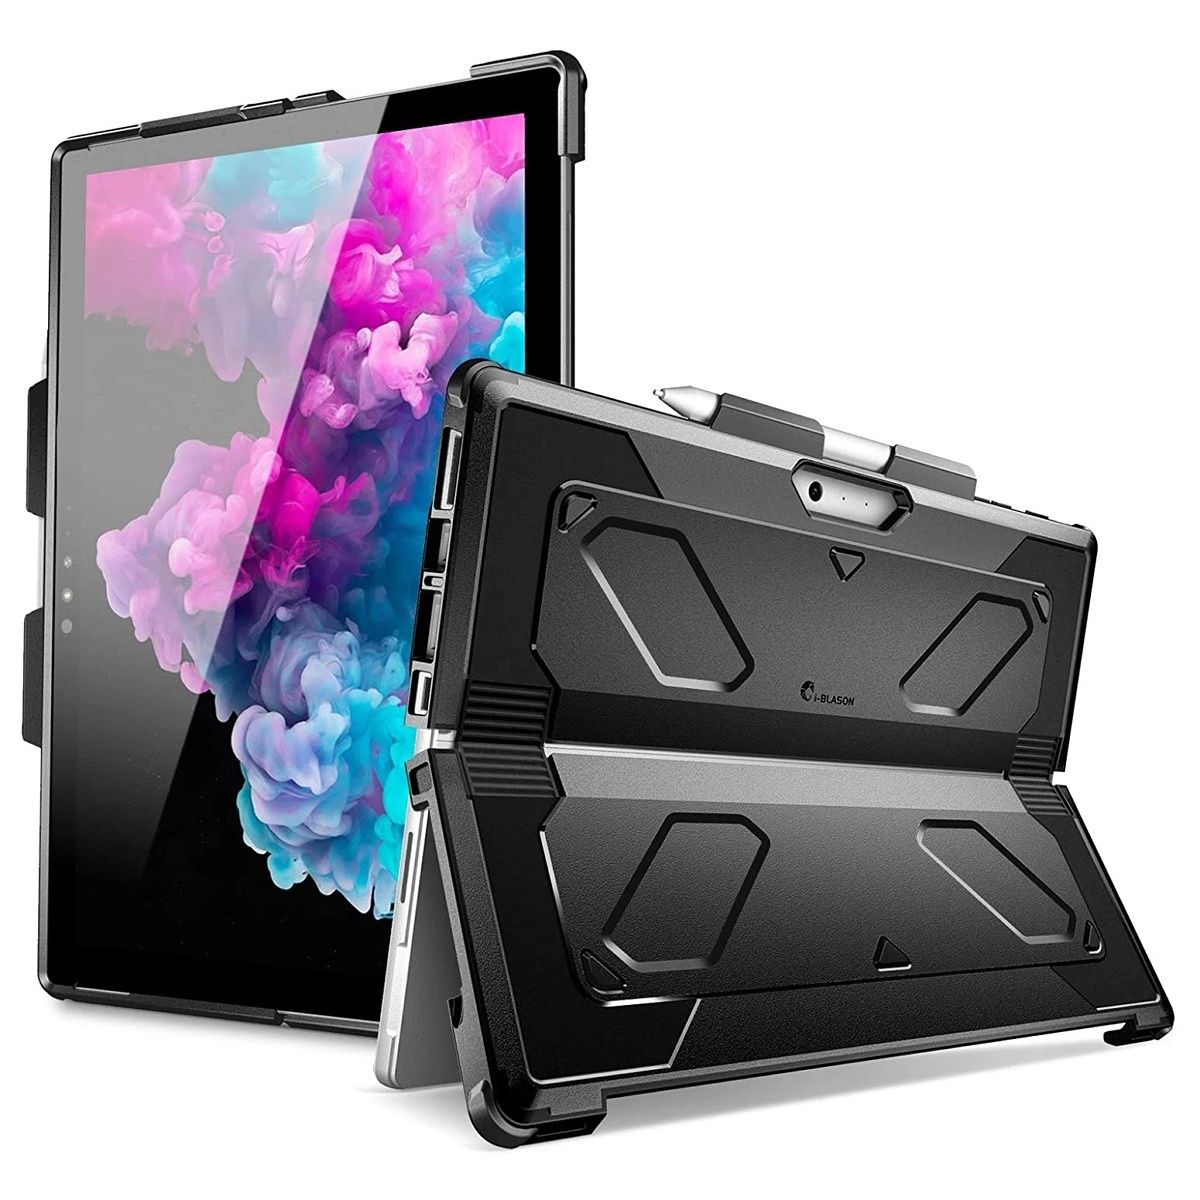 One of the toughest cases out there, this offers total protection from drops, bumps, and falls. It's made out of strong TPU and plastic materials, and even has cutouts for the ports as well as ventilation for the CPU cooler.